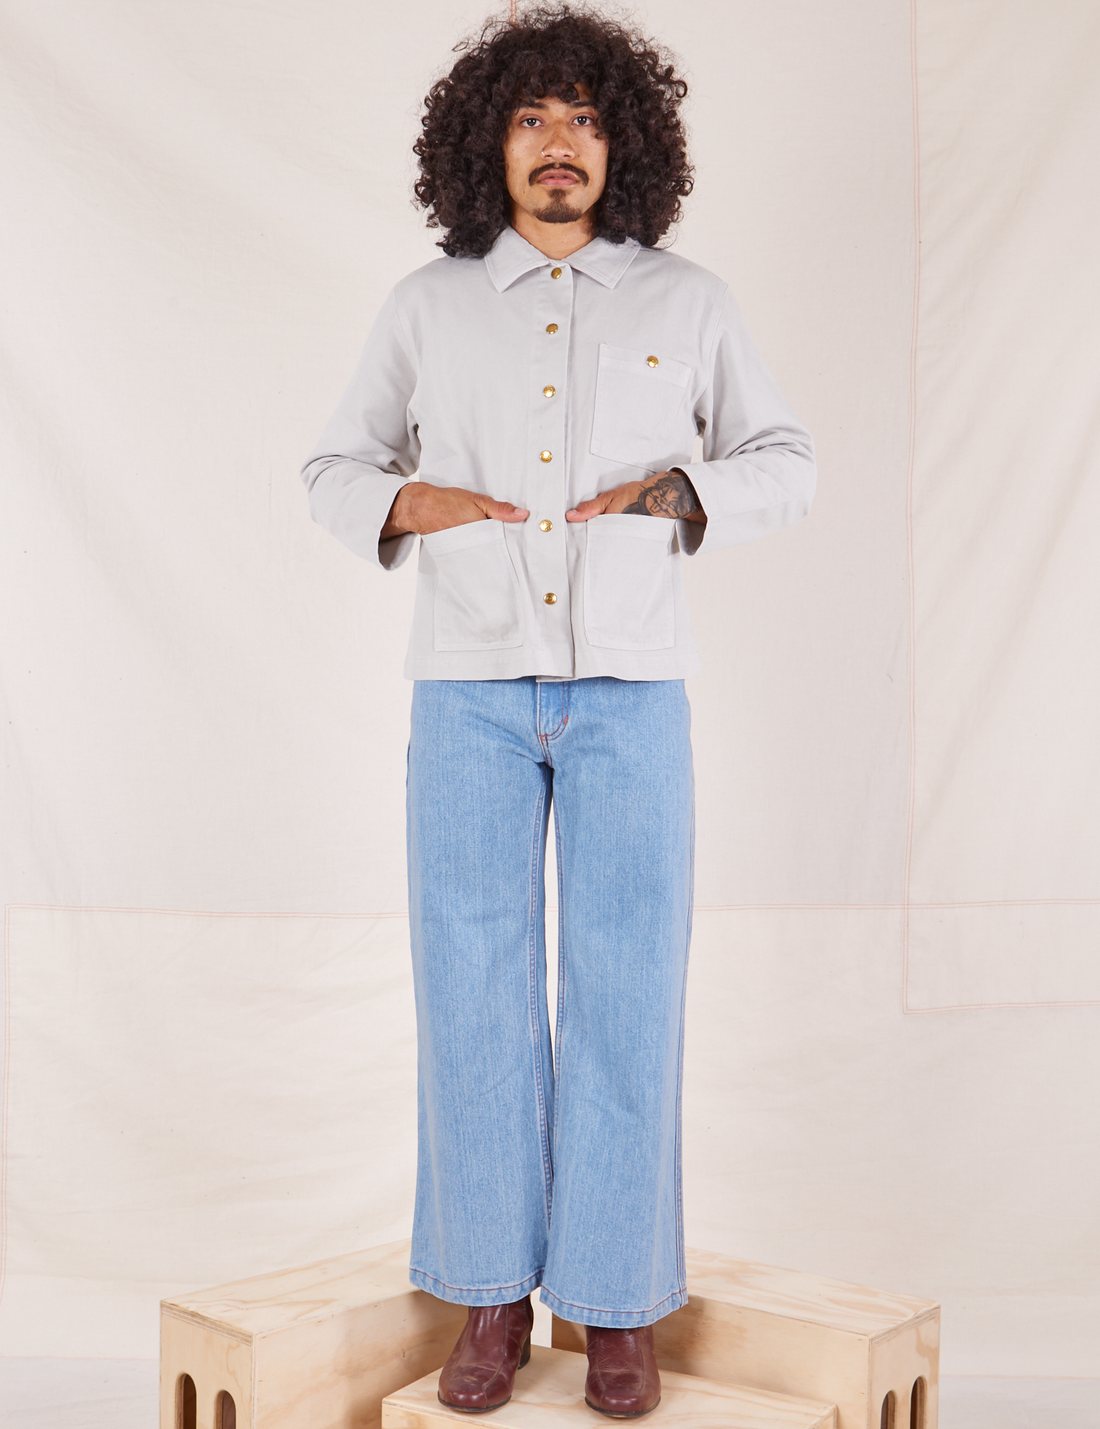 Jesse is wearing a buttoned up Denim Work Jacket in Dishwater White paired with light wash Sailor Jeans